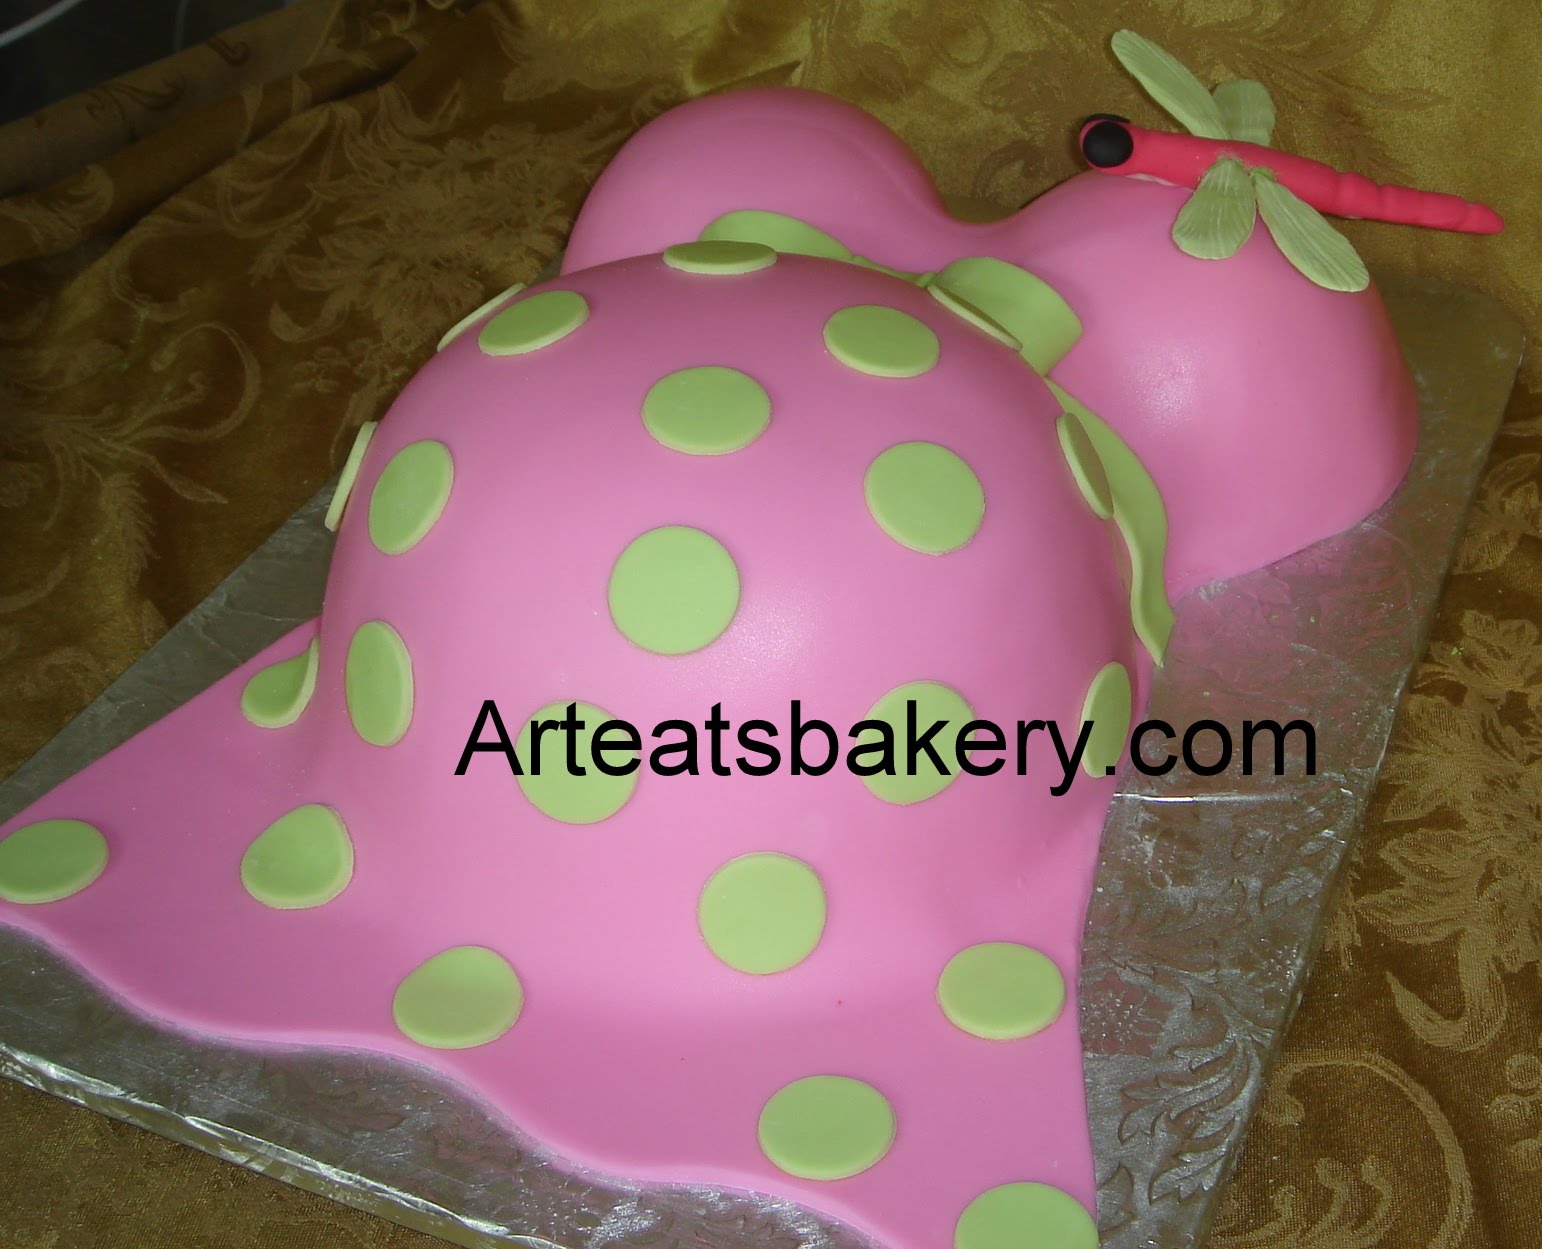 Maternity top in pink fondant with green polka dots and ribbon tied in ...